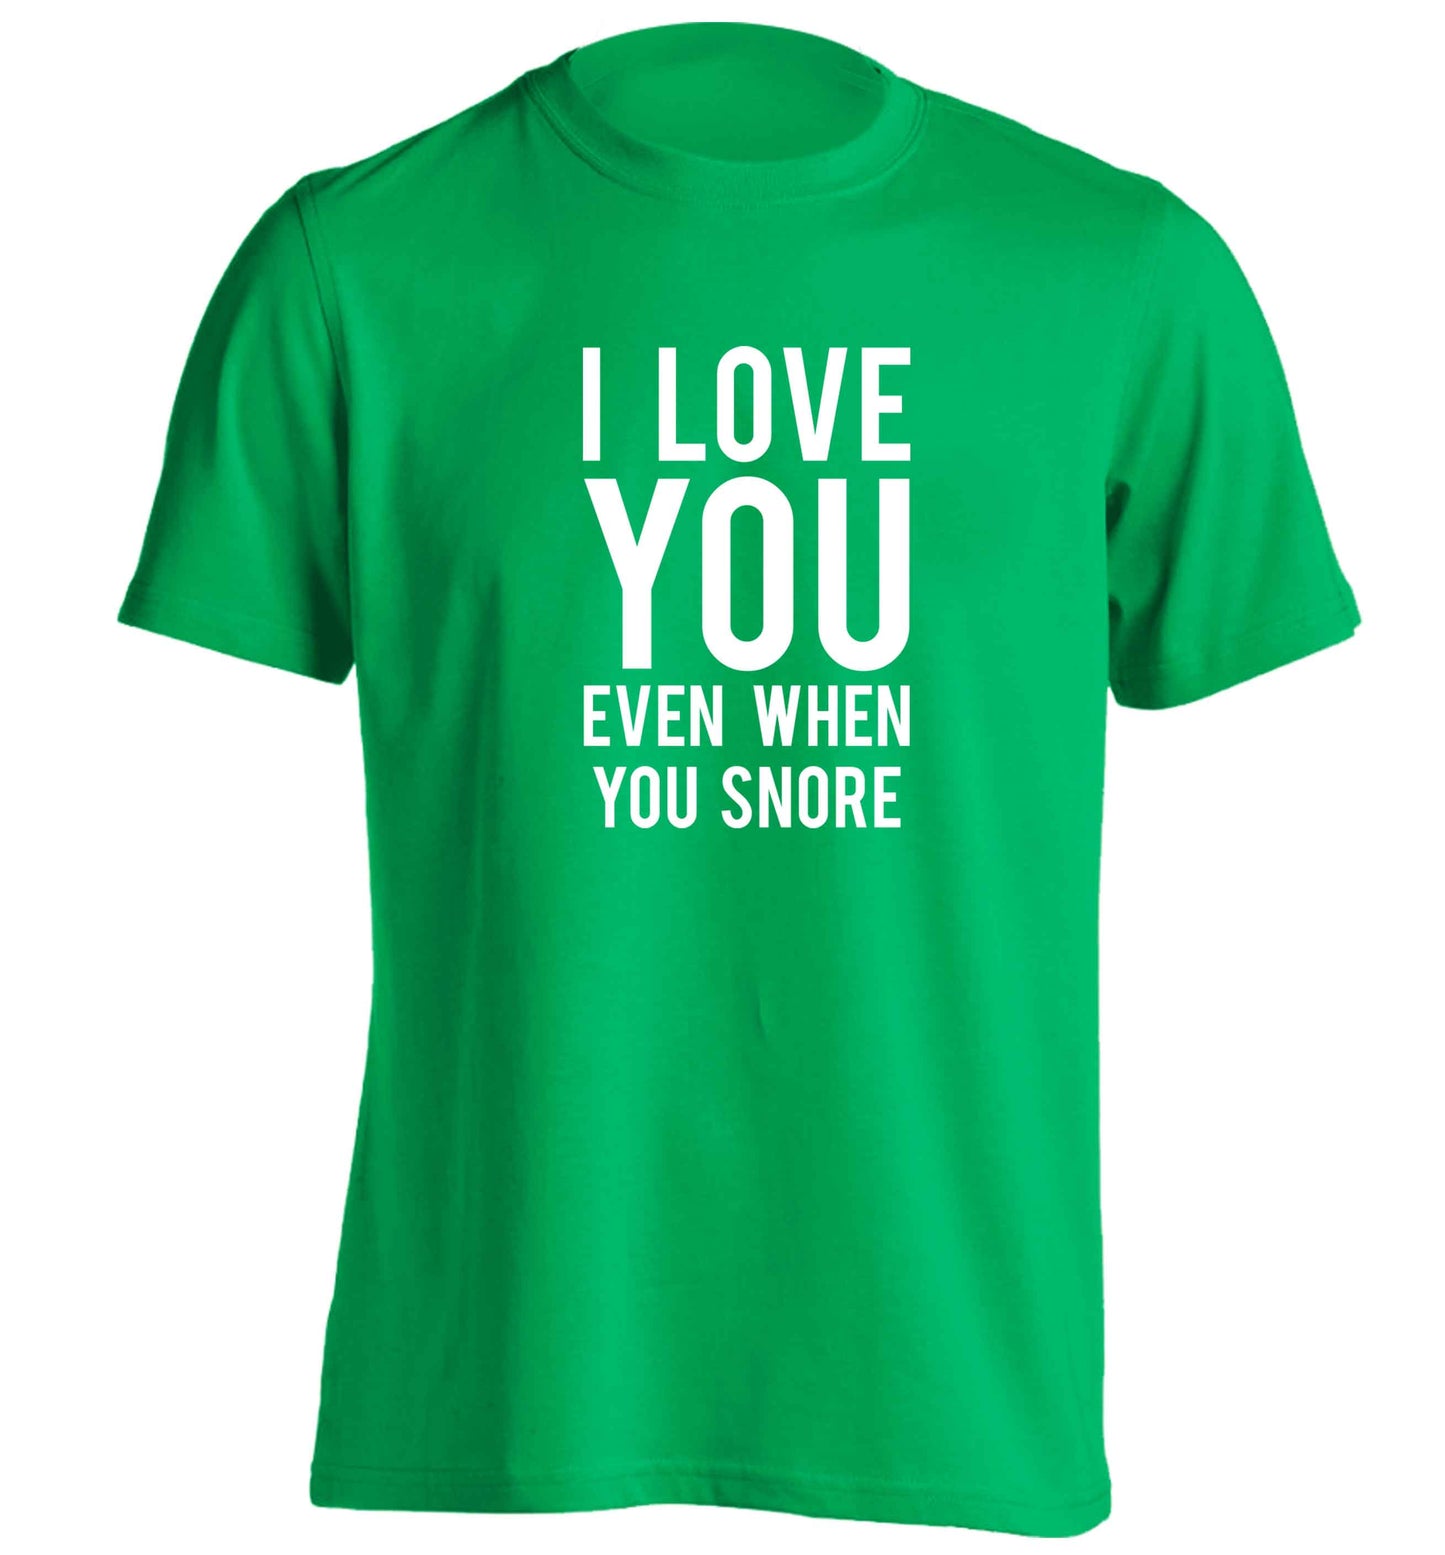 I love you even when you snore adults unisex green Tshirt 2XL